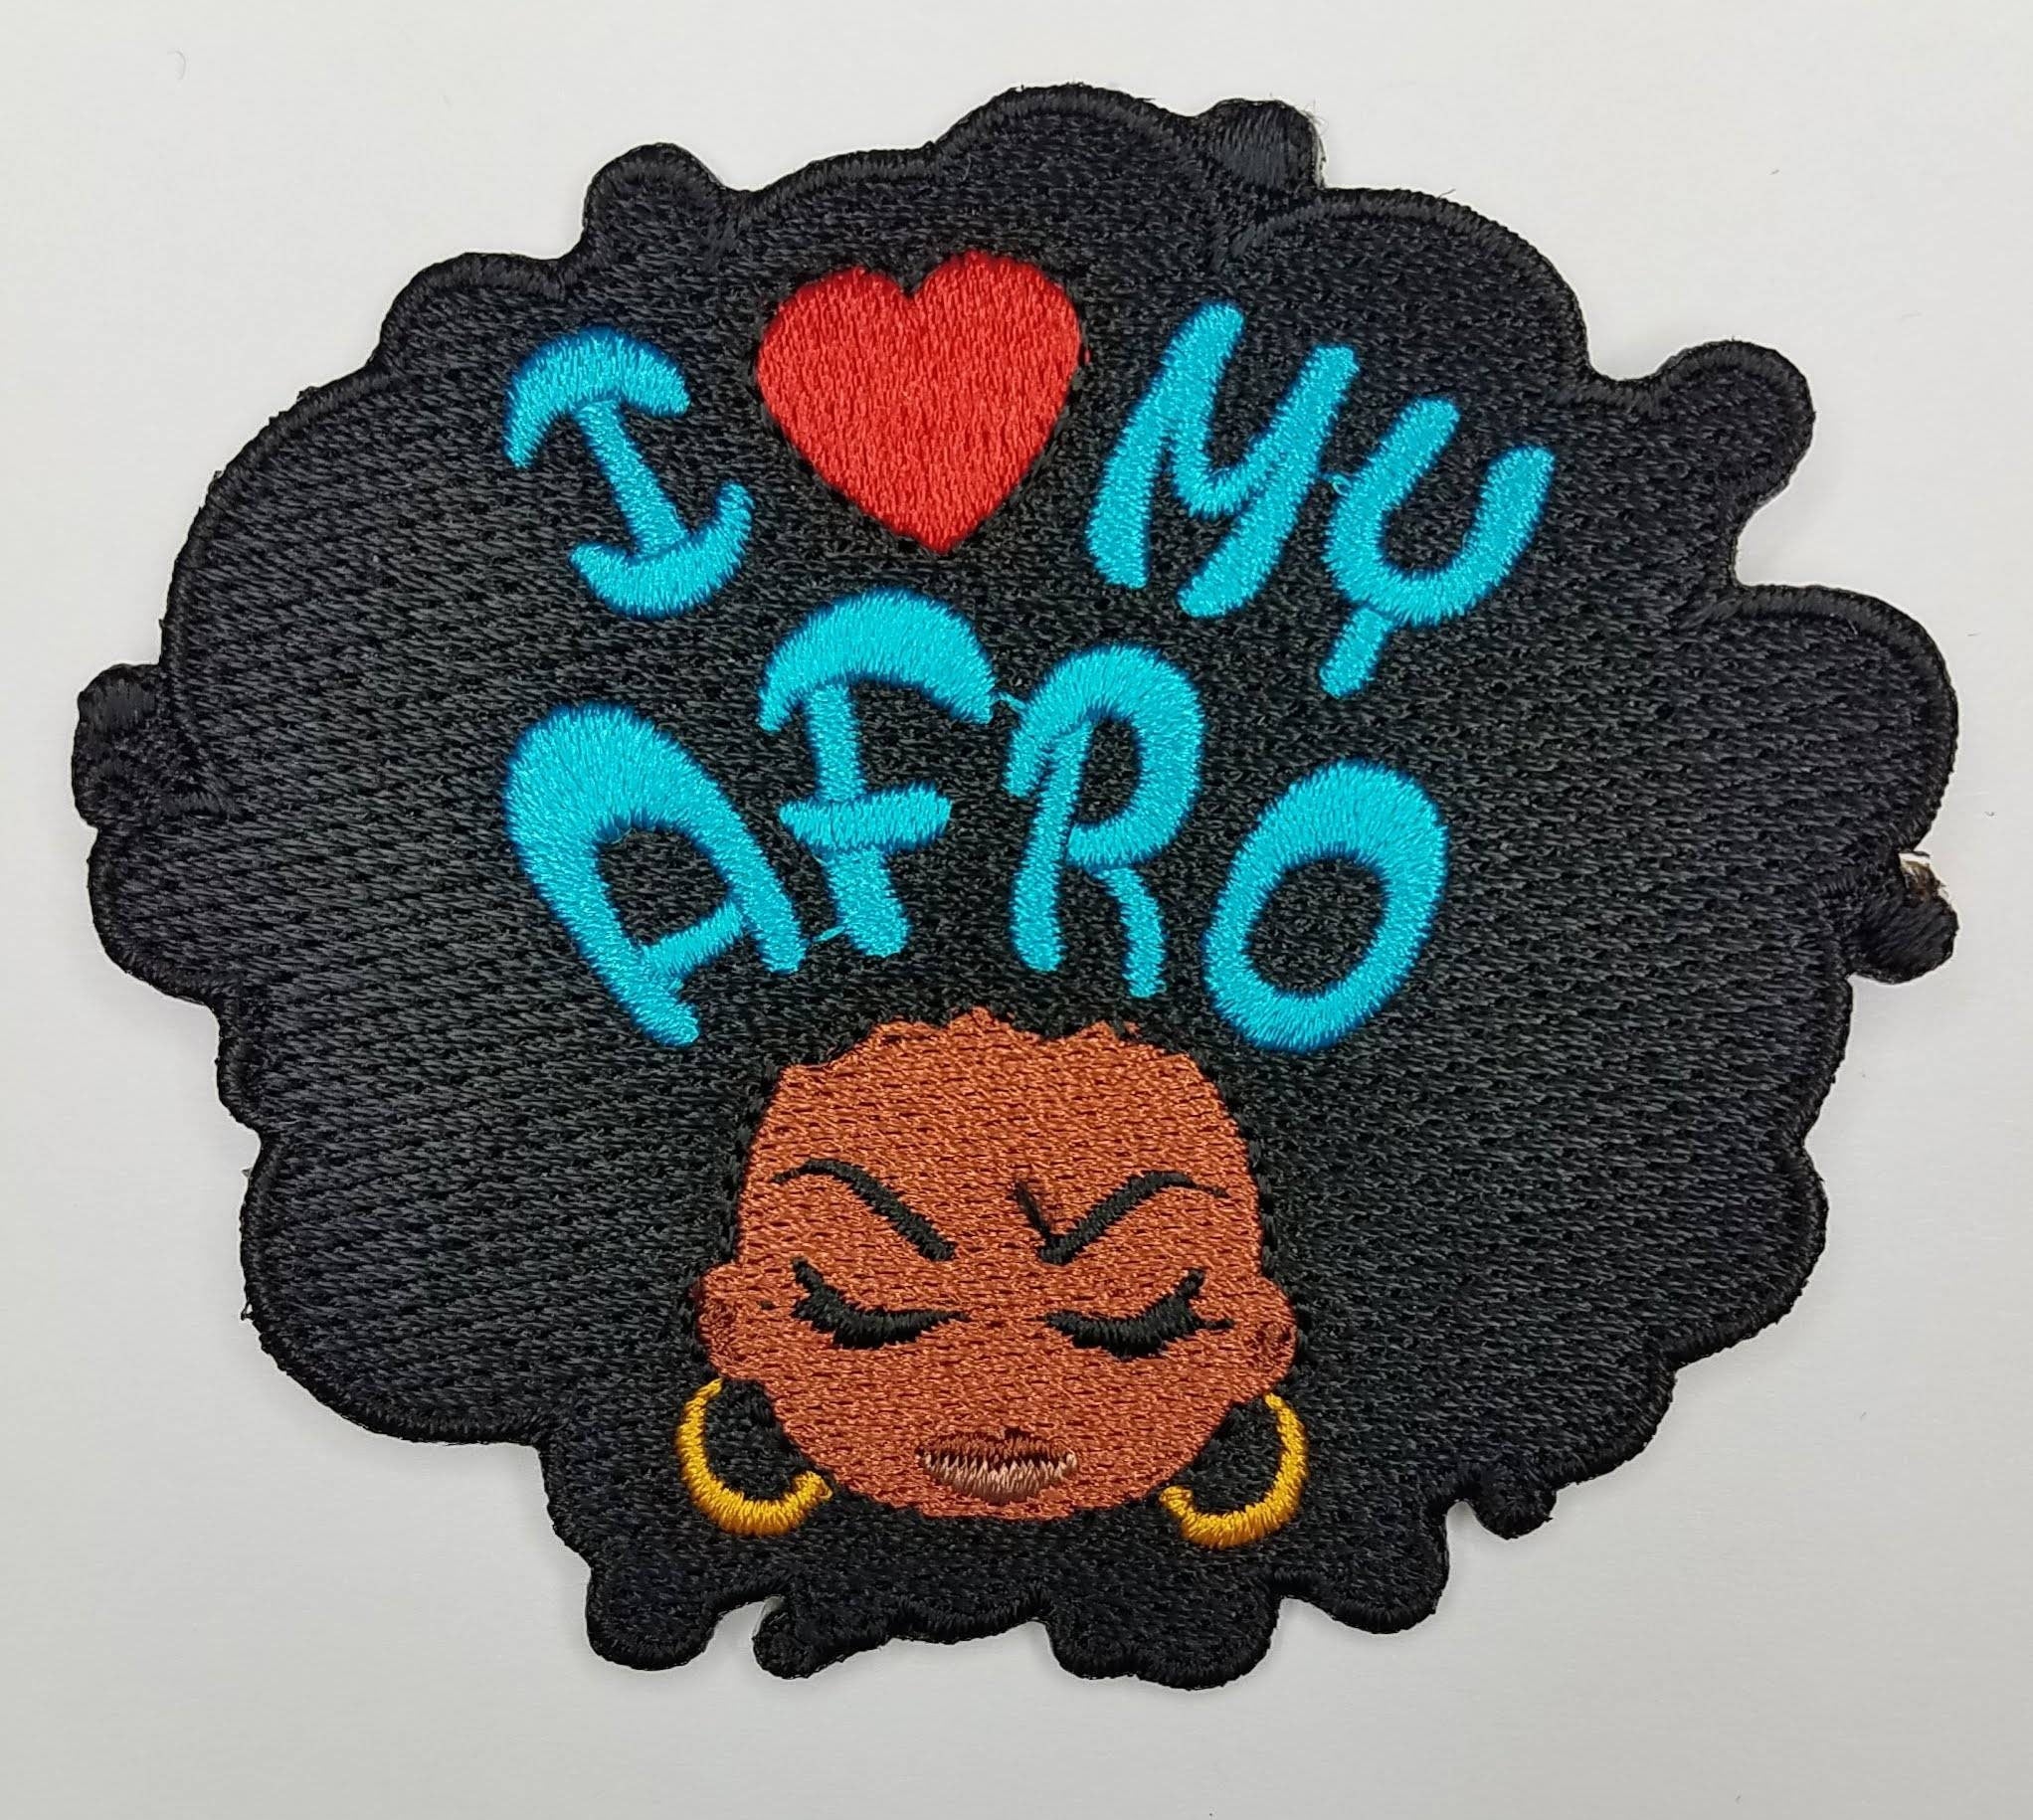 Cool, Embroidered Patch "I Love my Afro" 4-inch, Iron-on Afrocentric Patch, Cute Patch Badge